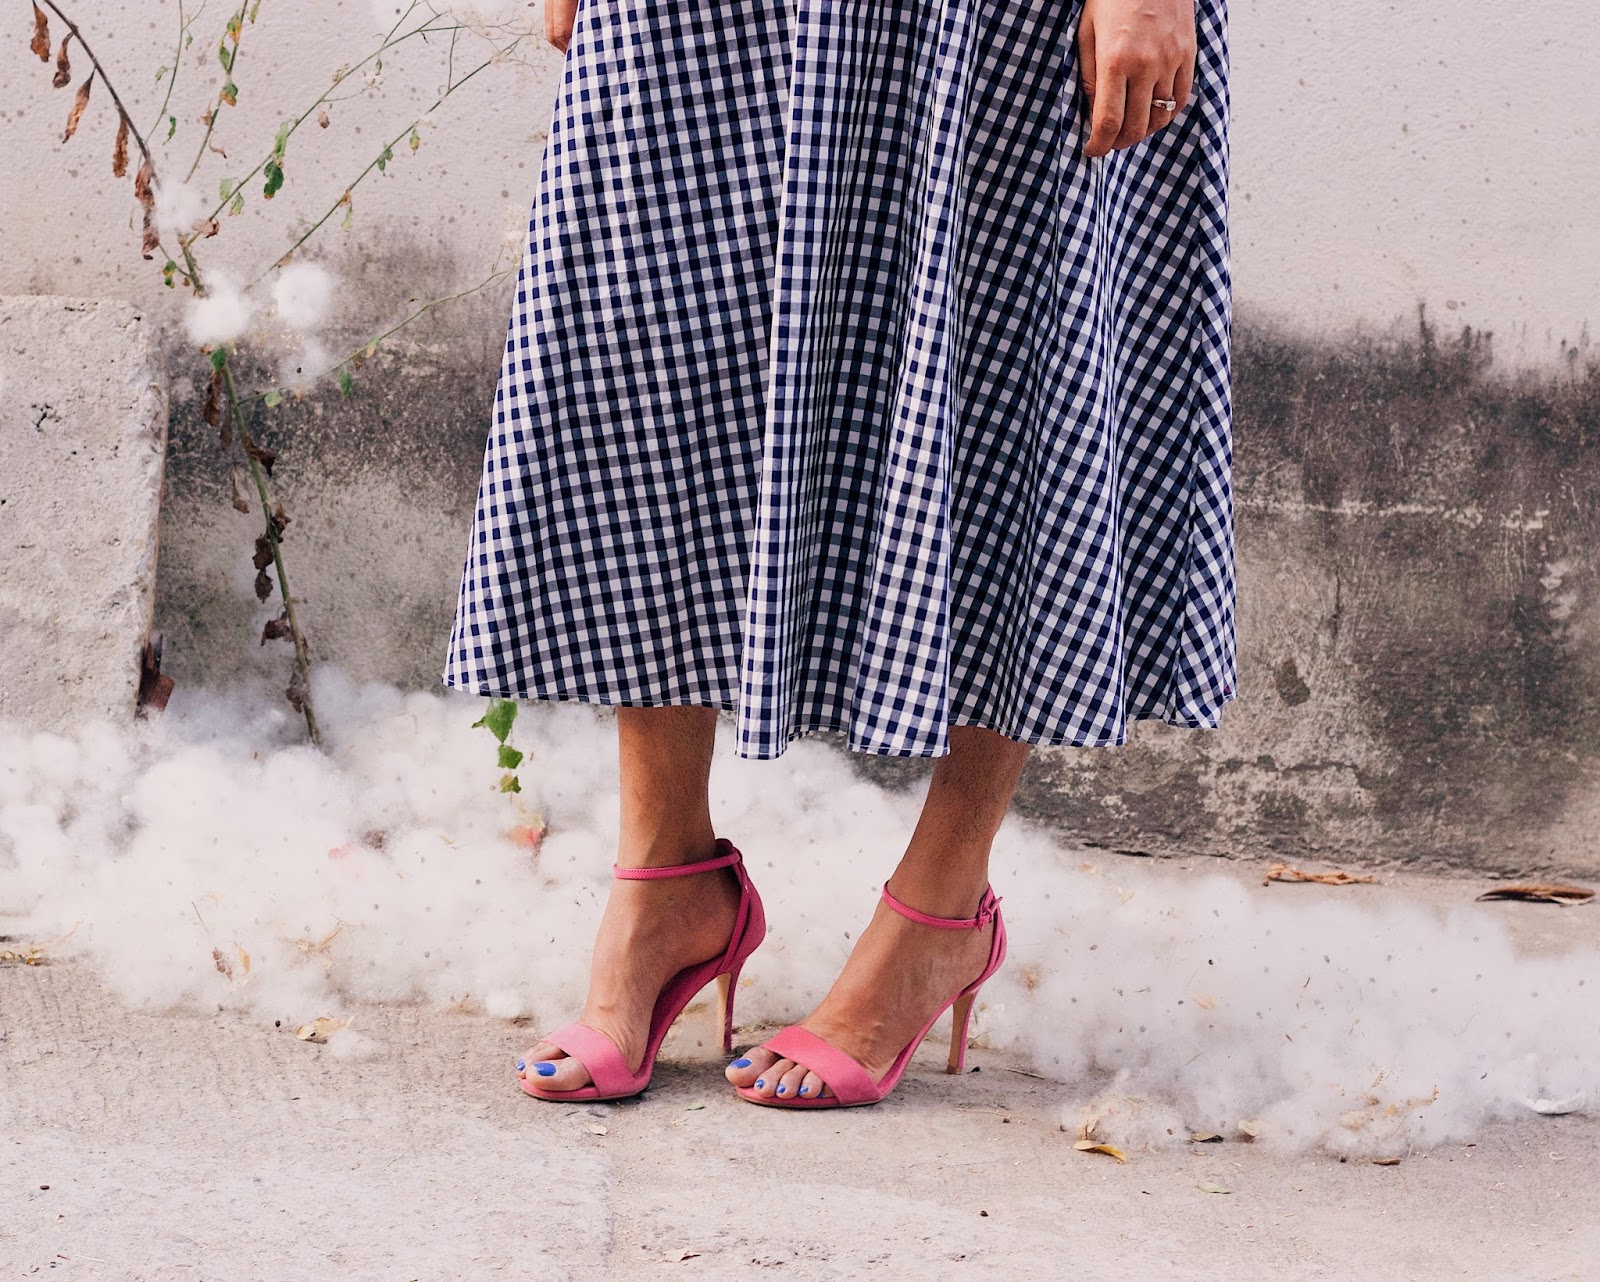 gingham, gingham trend, style gingham, trends 2017, gingham midi skirt, gingham top style, all gingham outfit, how and when to buy trends, when to buy trends, tips an tricks to buy trends, indian blog, indian blogger, top indian blog, indian luxury blog, uk blog, british blog, london blog, delhi blogger, street style, spring summer 2017, spring summer lookbook, wear trends, how to, how to style, effortless chic, parisian style, how to dress, style tips, street style delhi, 